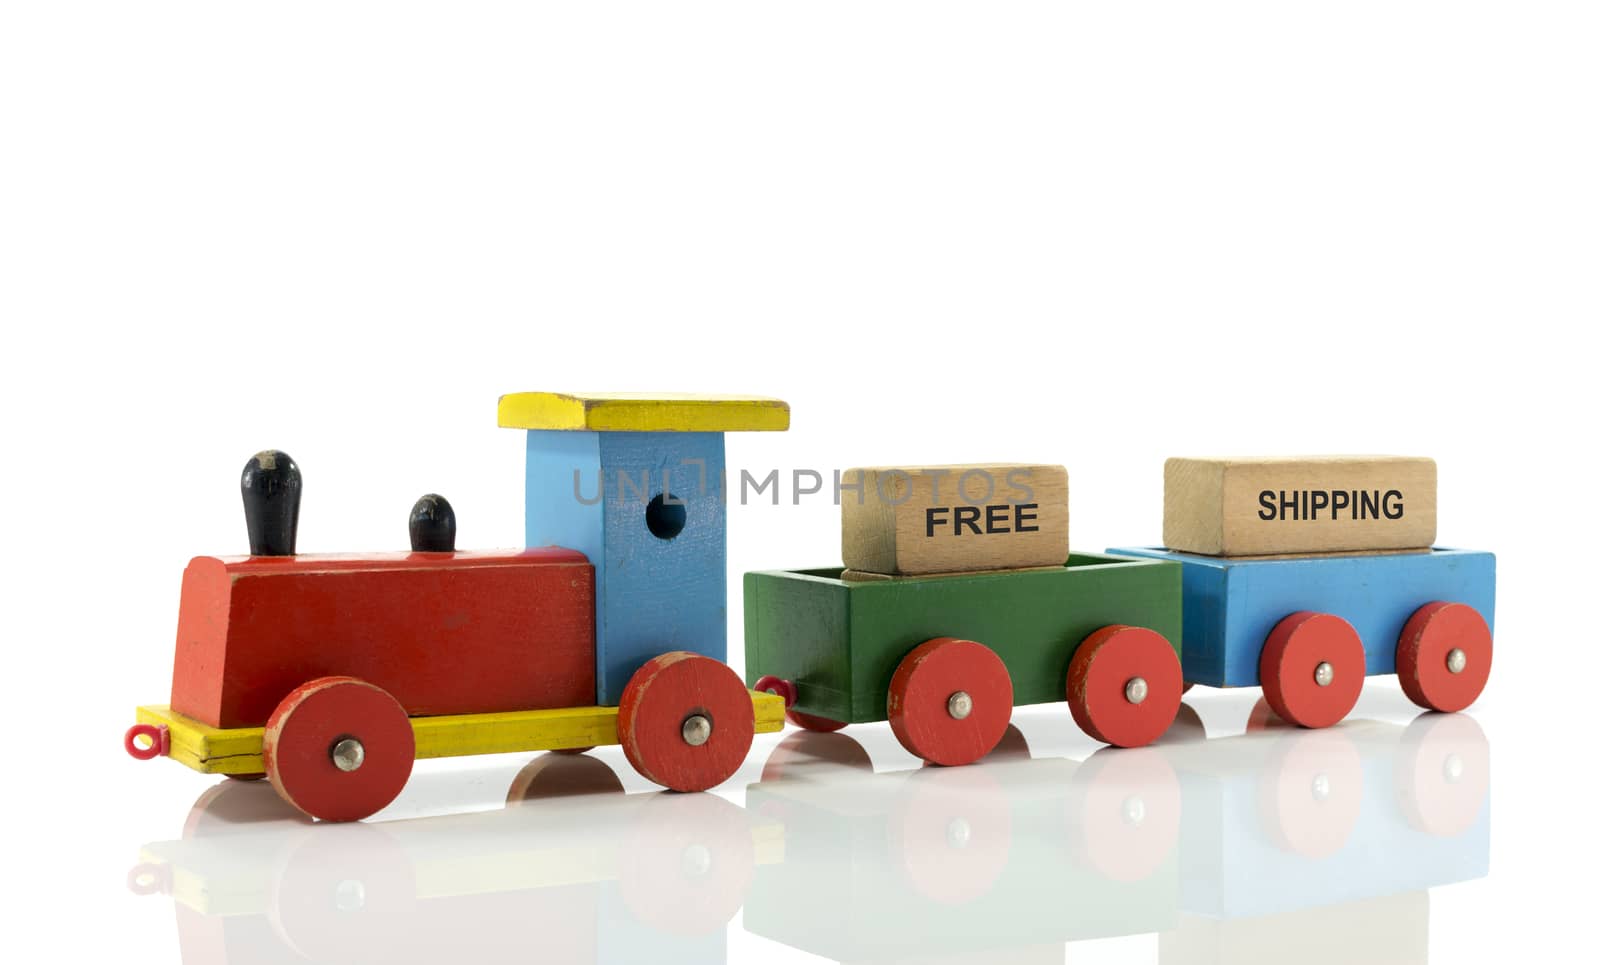 train with free shipping text transport